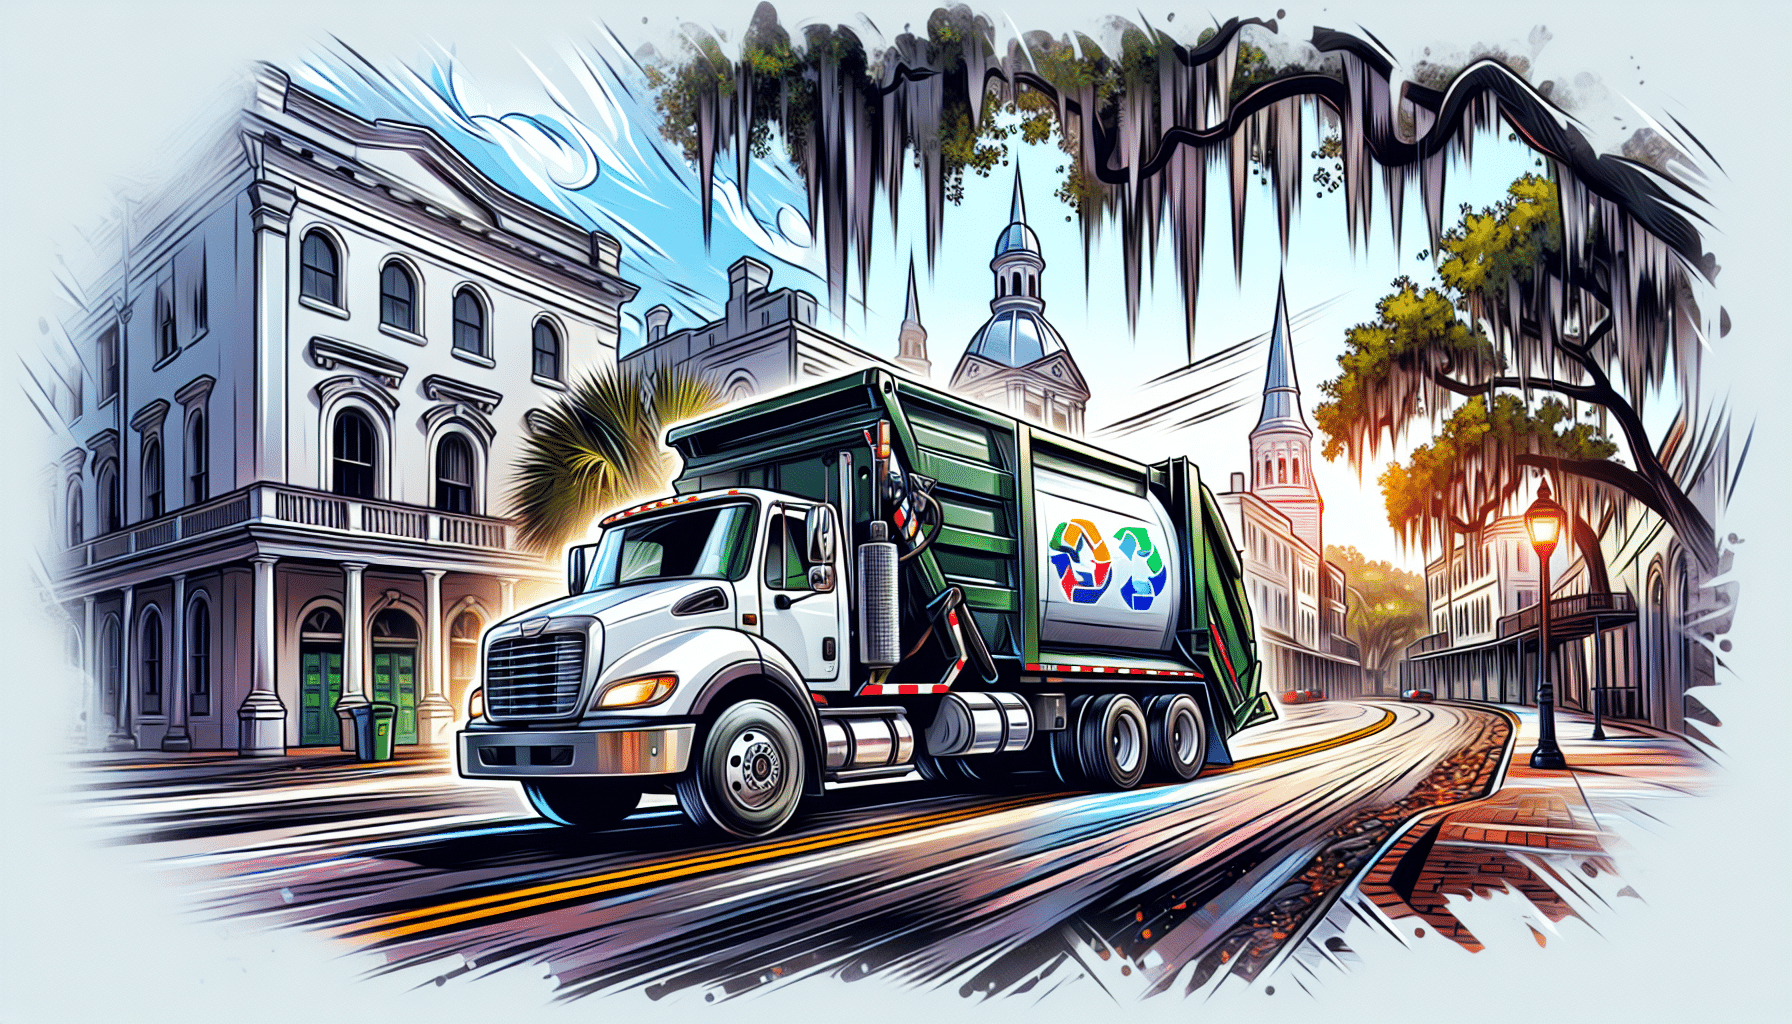 Illustration of waste removal truck in Savannah